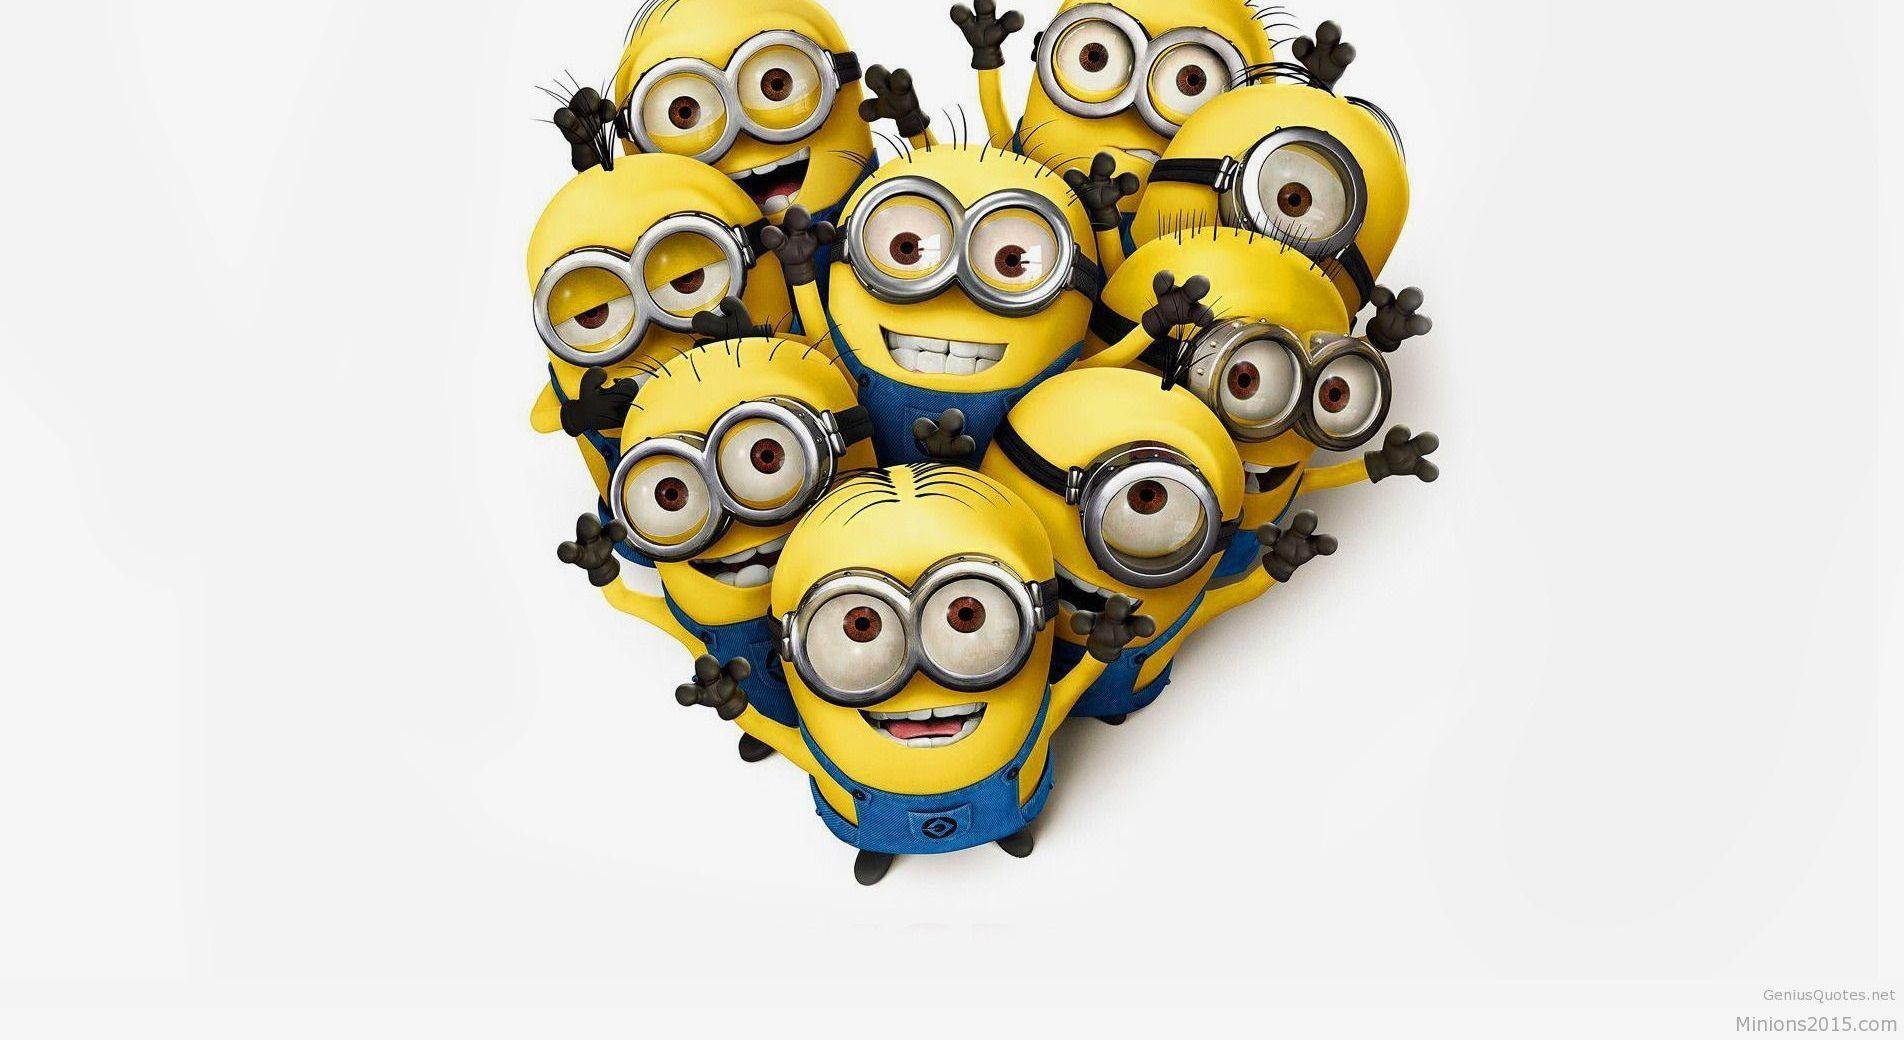 minions background tumblr 5. Background Check All